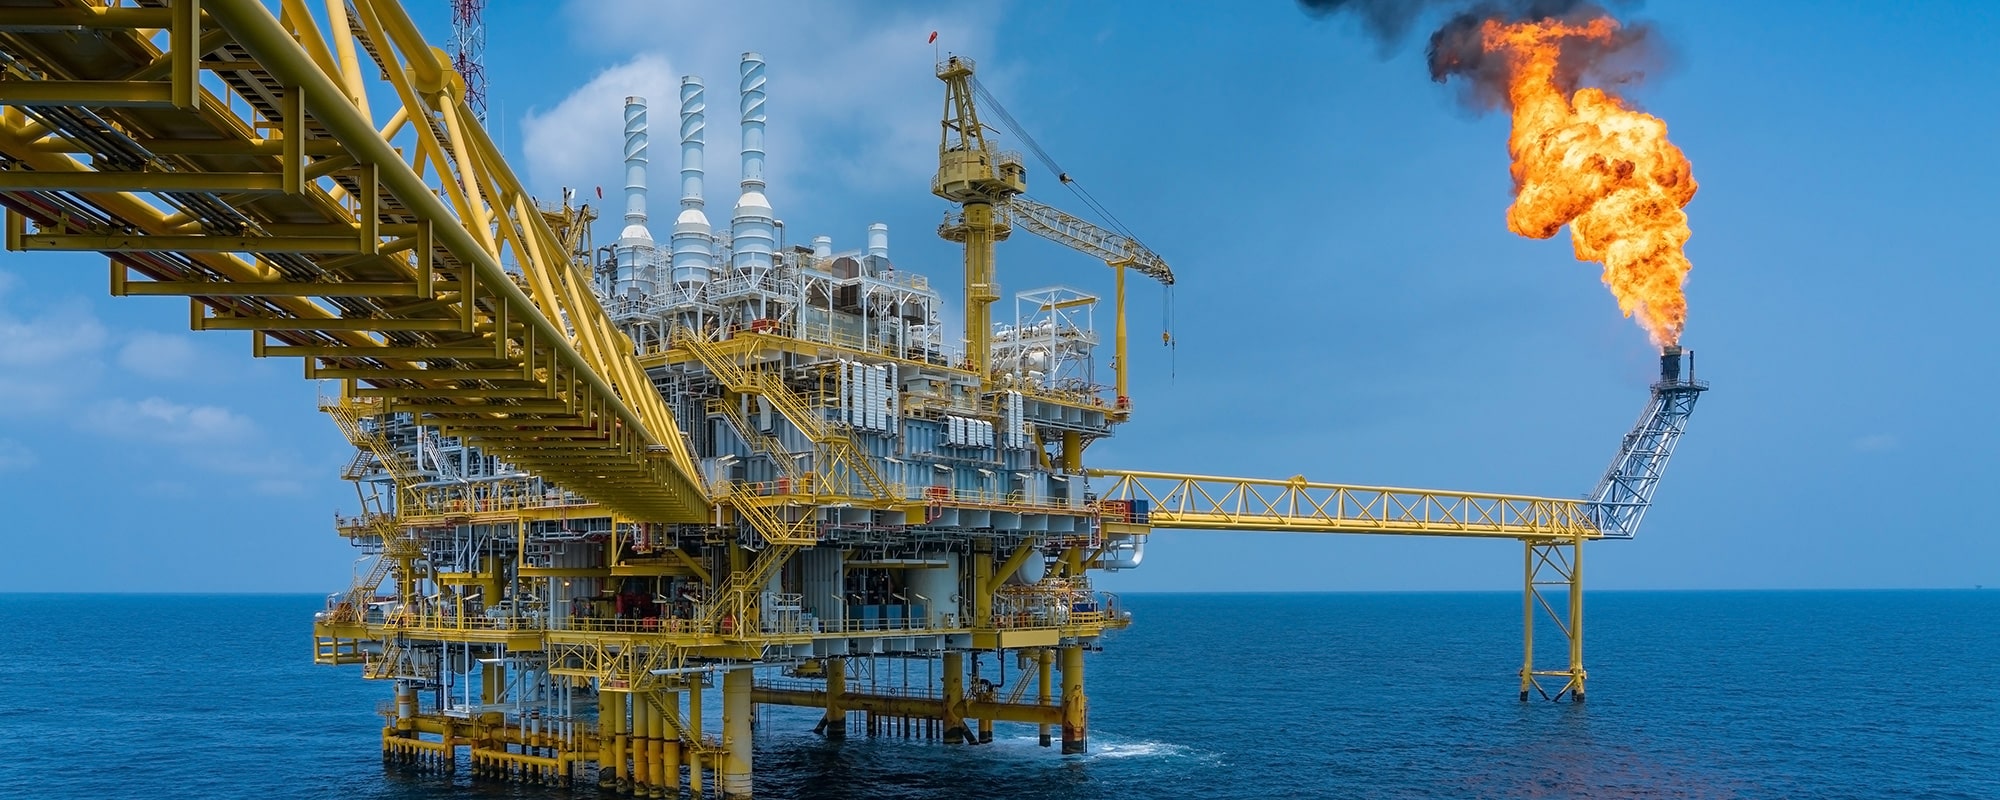 stock photo-offshore-oil-and-gas-construction-platform-while-vent-gases-to-flare-platform-to-prevent-over-1085365172